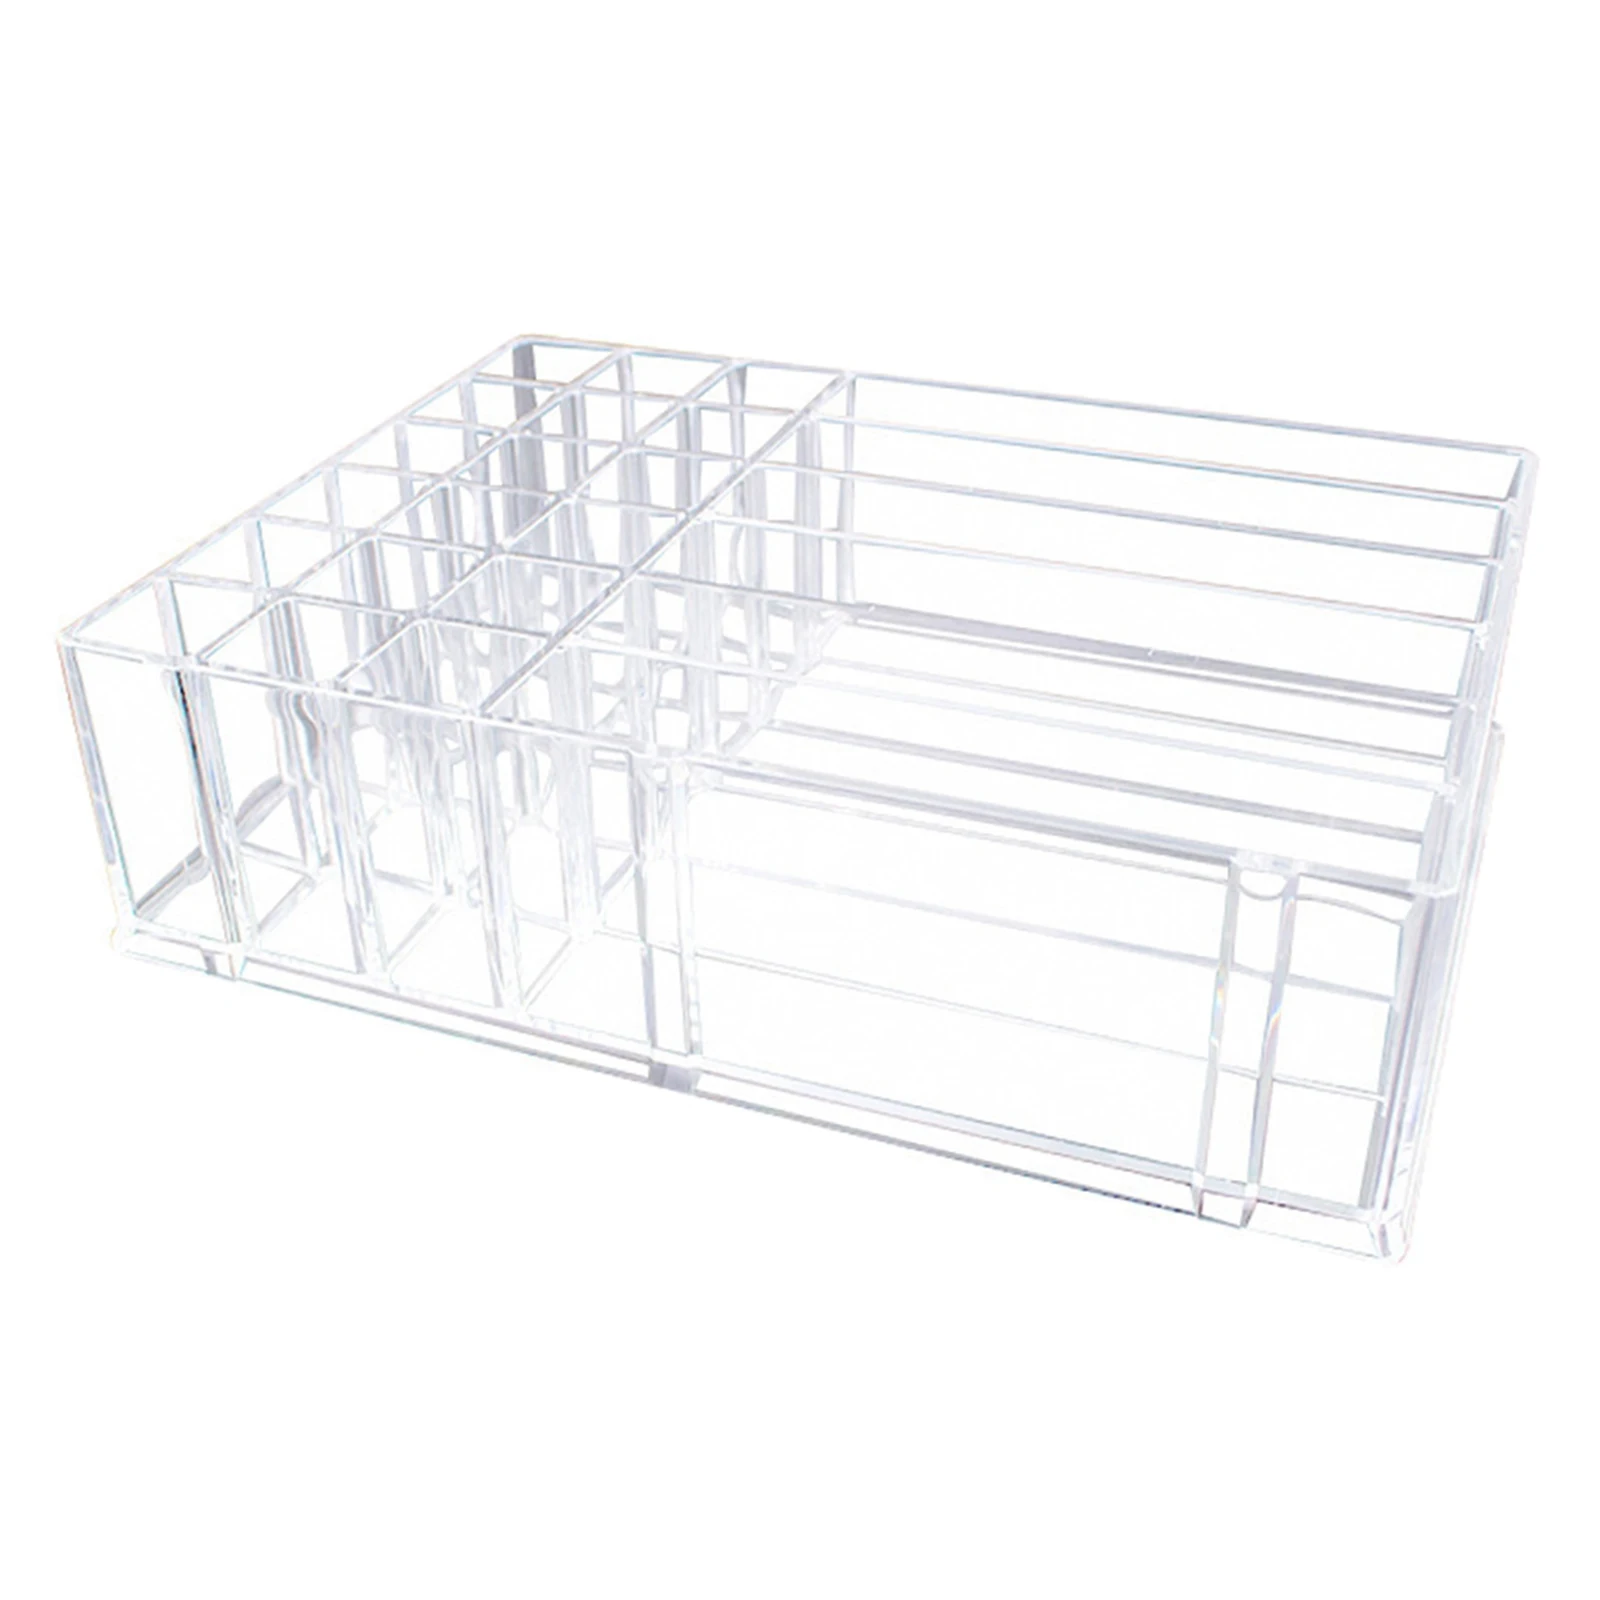 Acrylic Makeup Organizer Compact Organizer Makeup Holder Organizer with Removable Dividers9.7x7.2x2.8inches